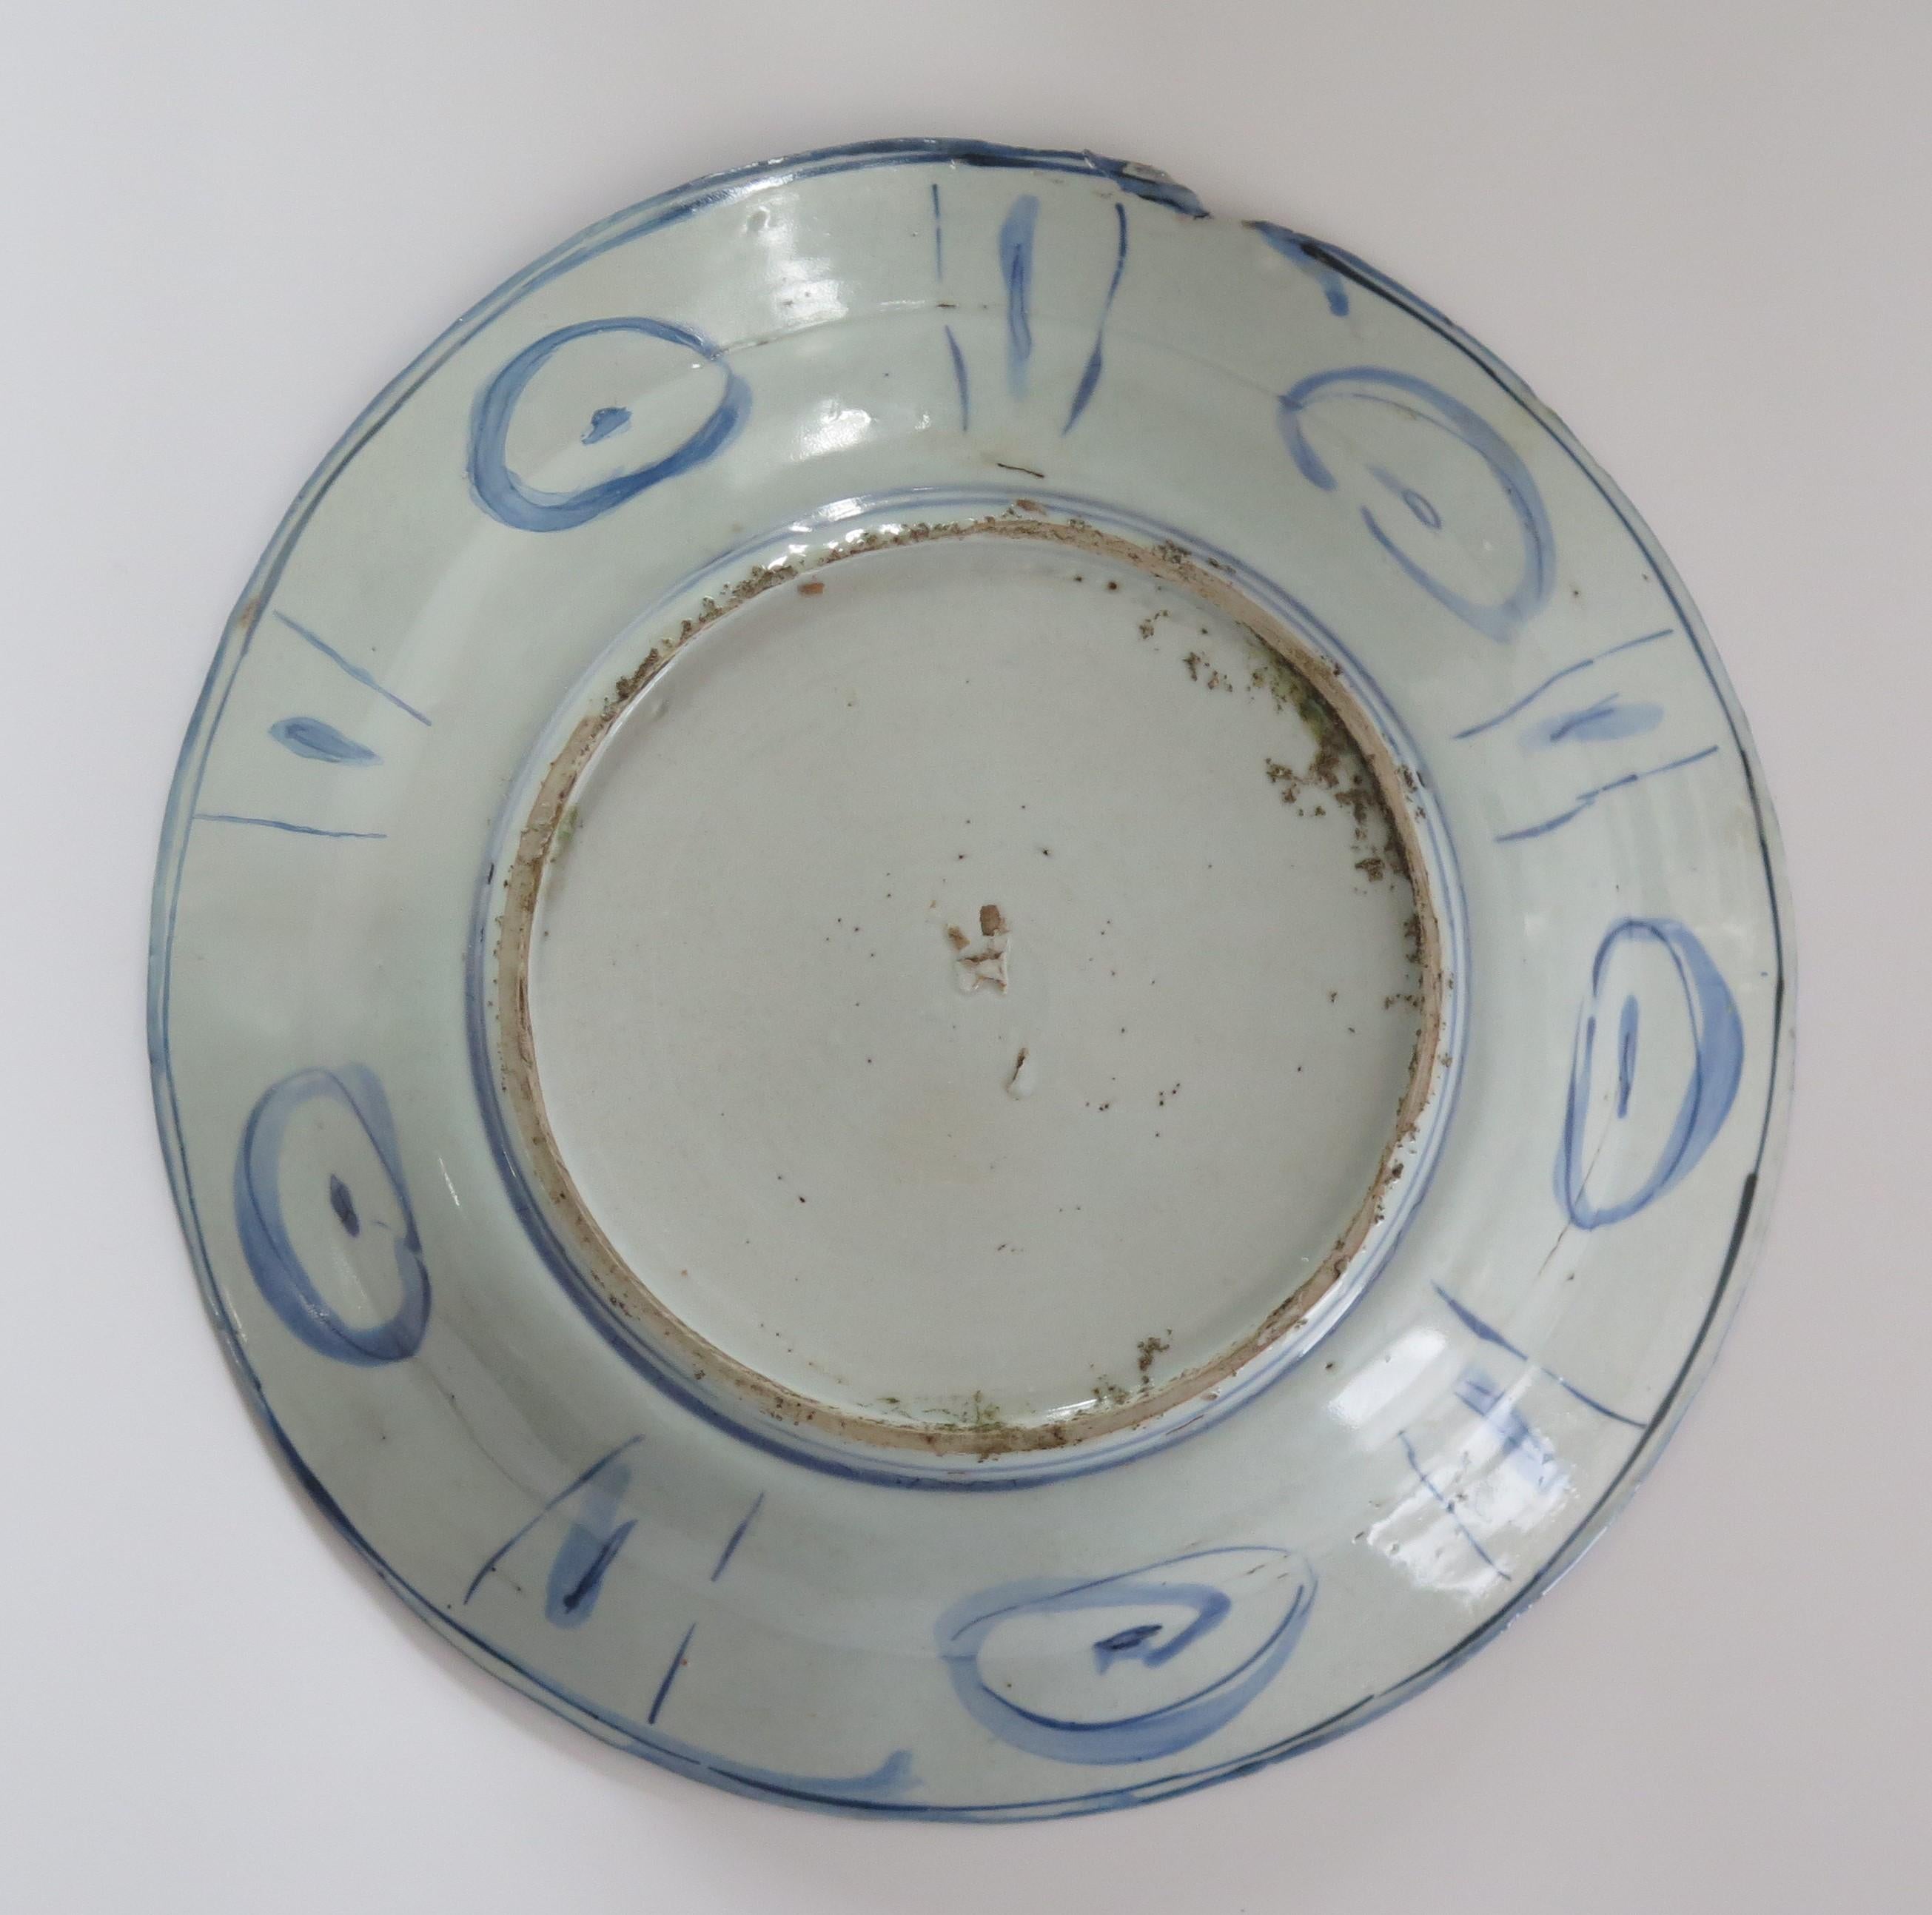 Kraak Chinese Porcelain Dish or Deep Plate Blue and White, Ming Wanli circa 1600 6